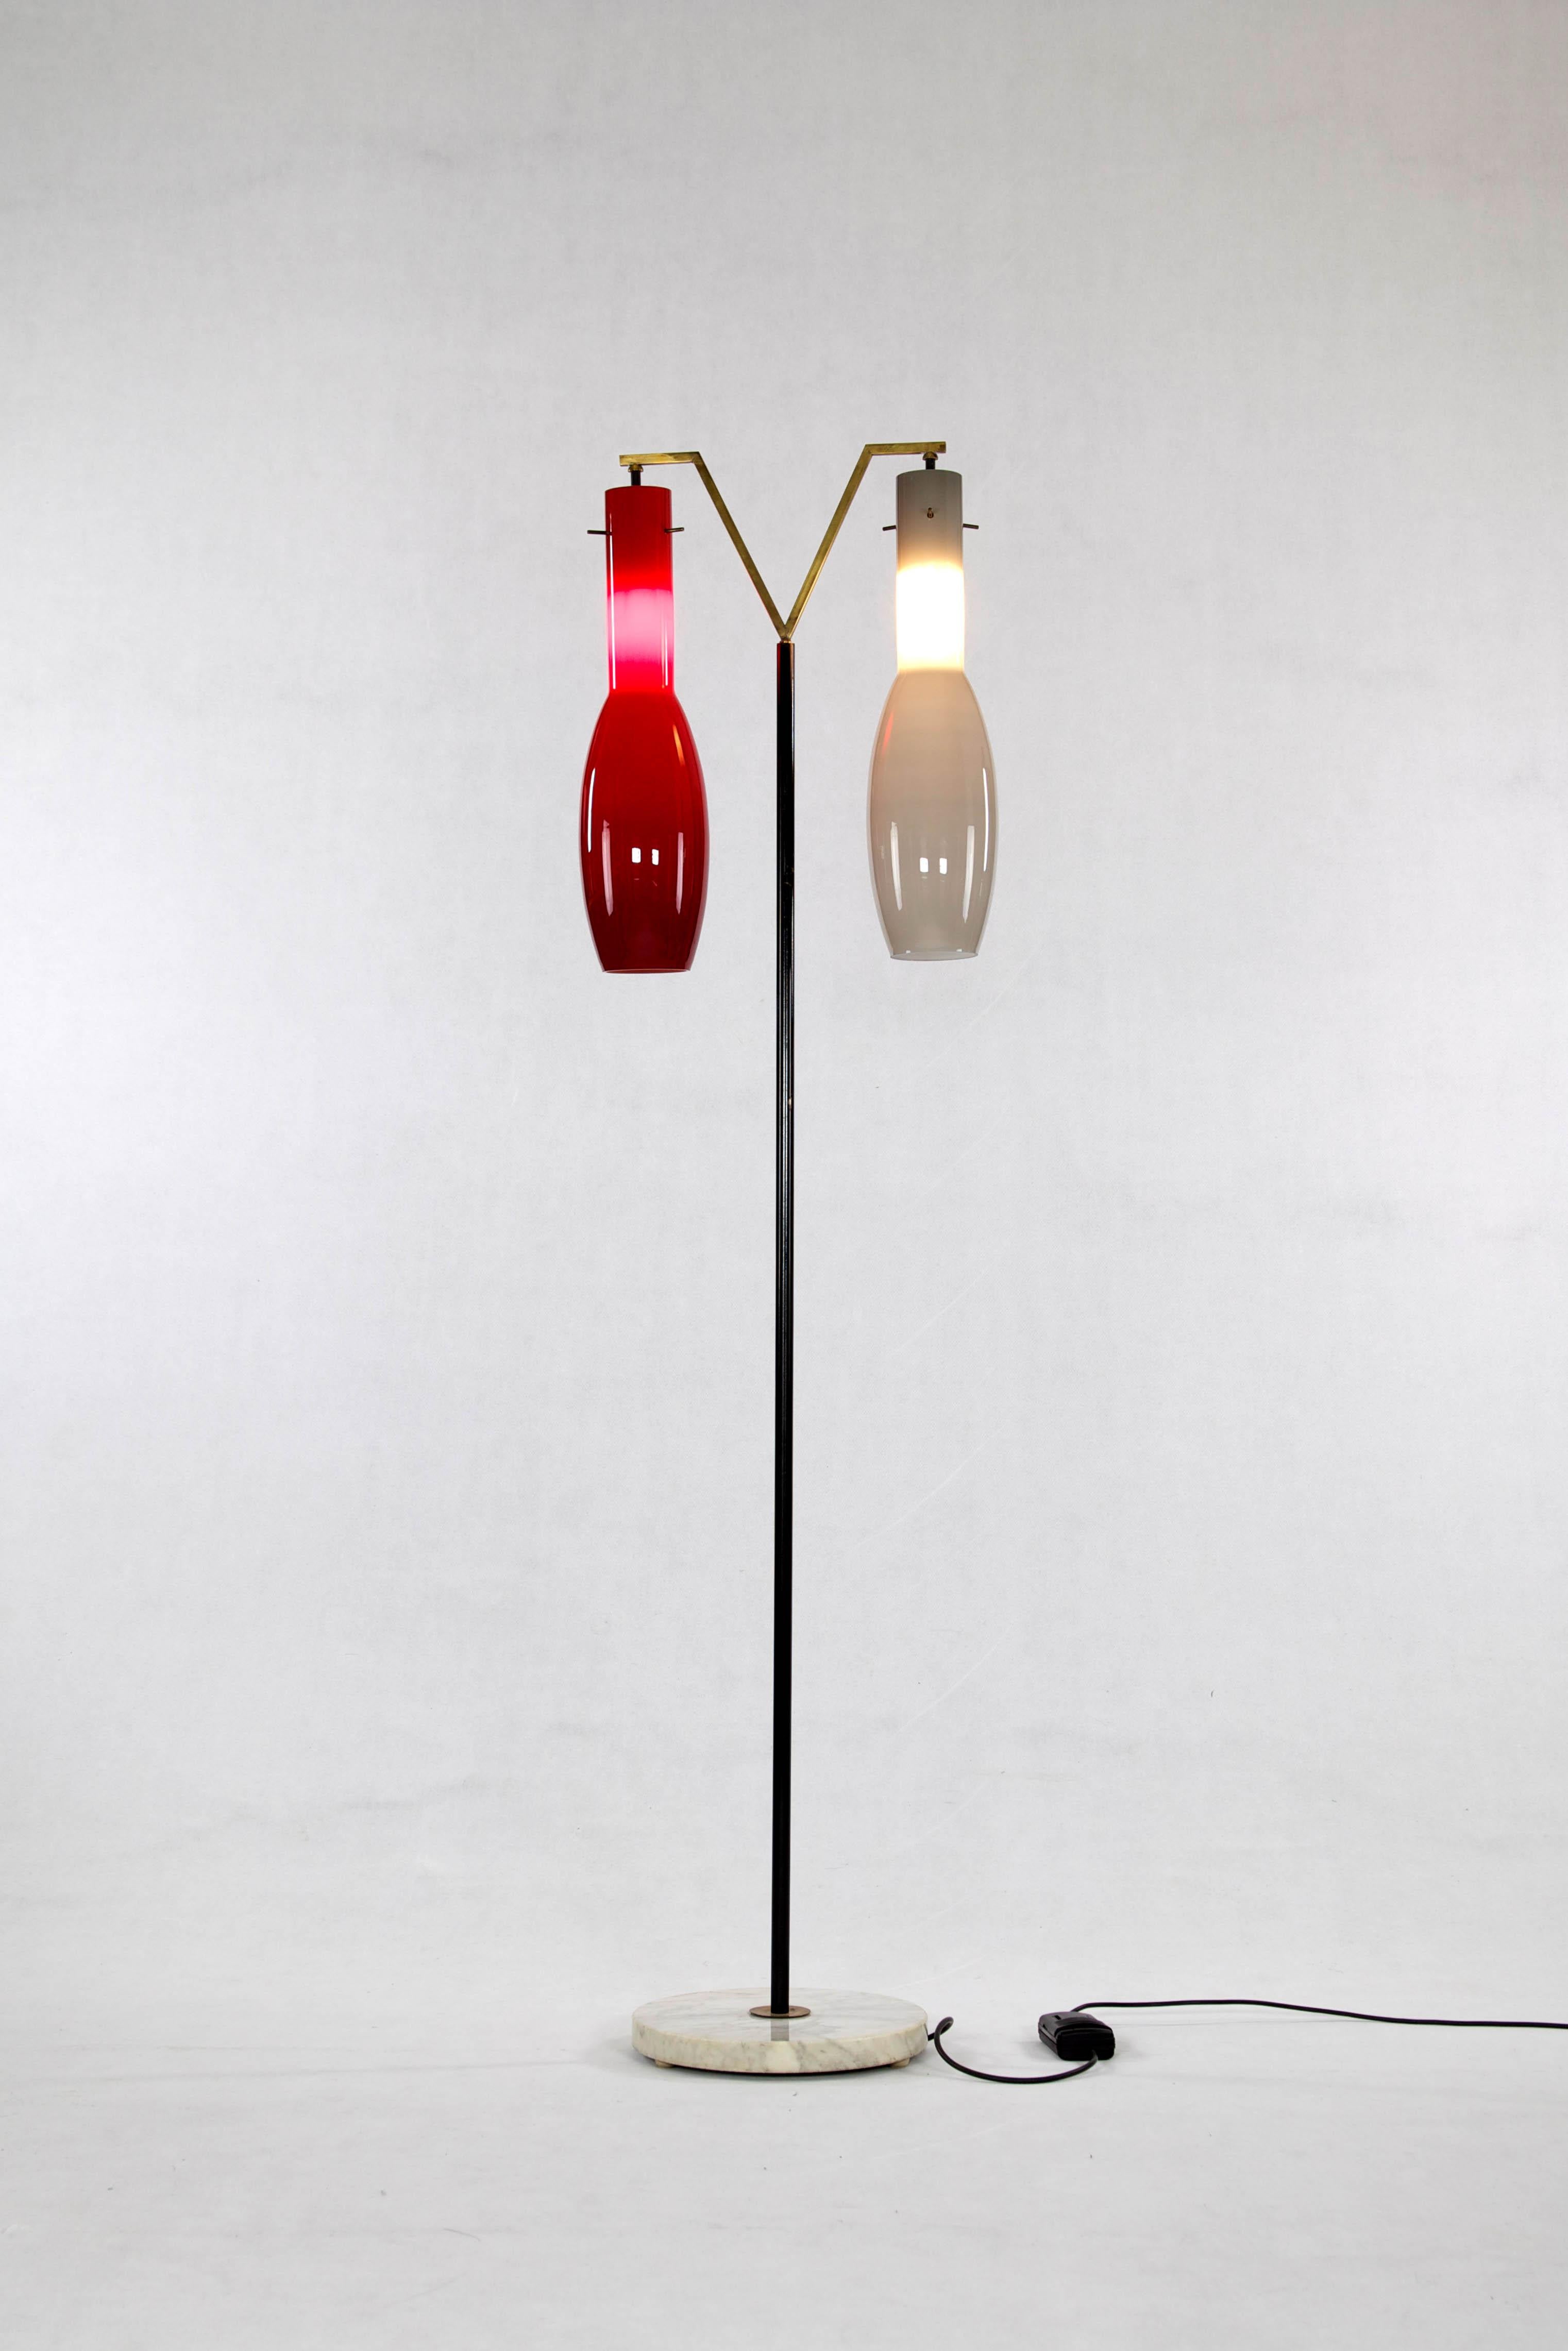 Mid-Century Modern Italian Two-Tone Glass Shades Floor Lamp with Lacquered Iron Bar, 1950s